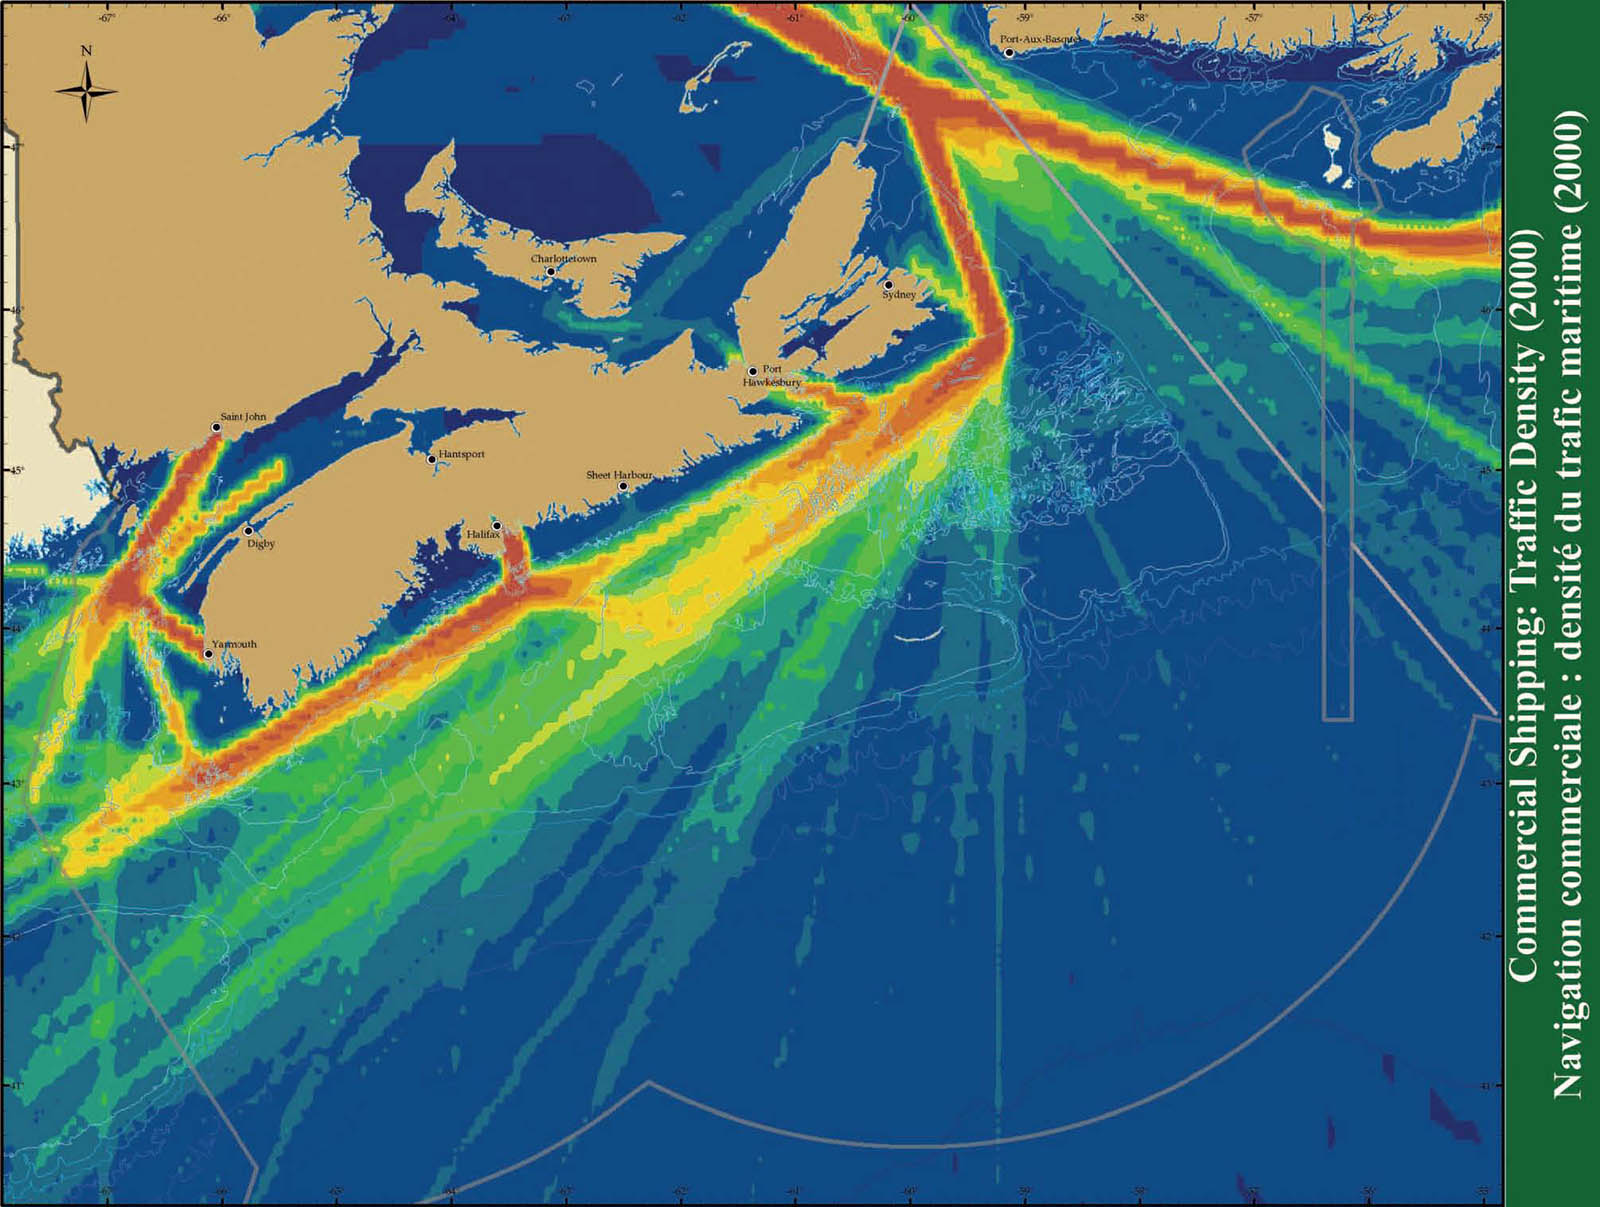 Commercial Shipping: Traffic Density (2002)